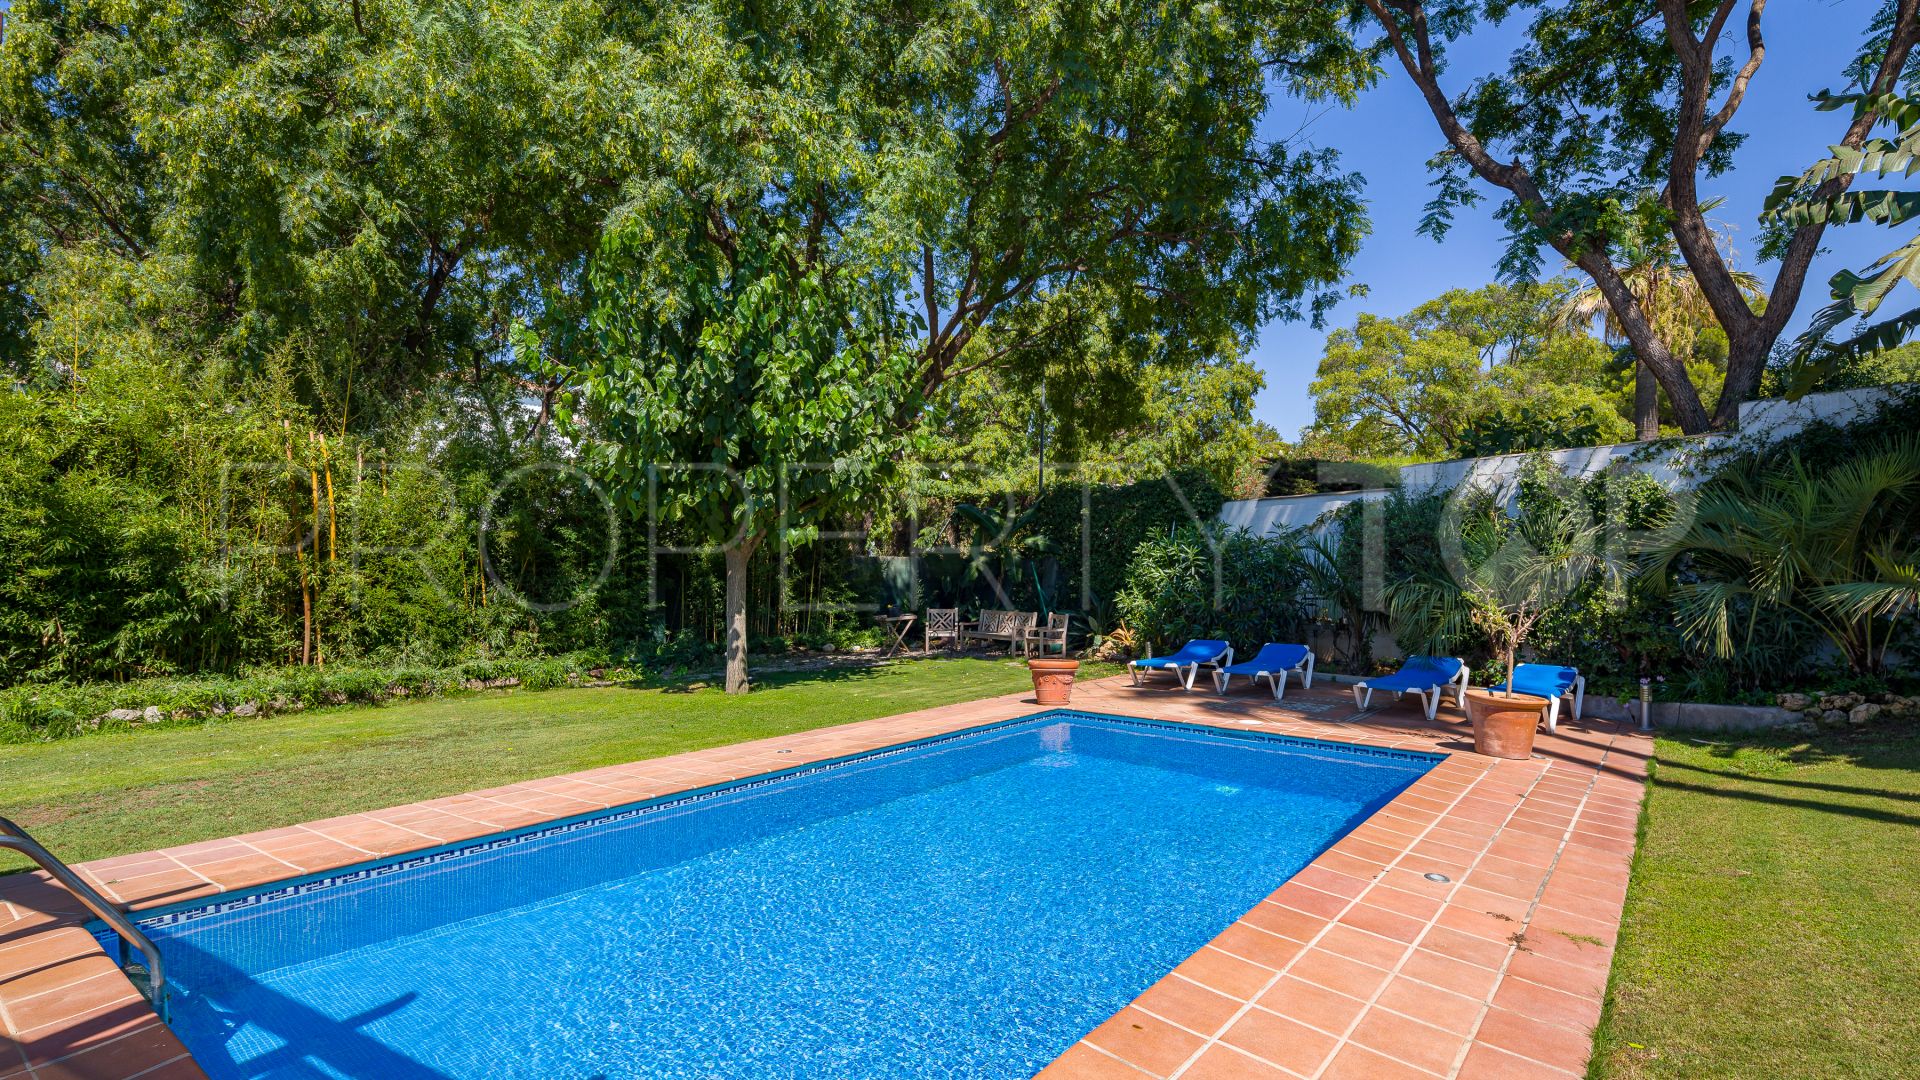 5 bedrooms house for sale in Nueva Andalucia